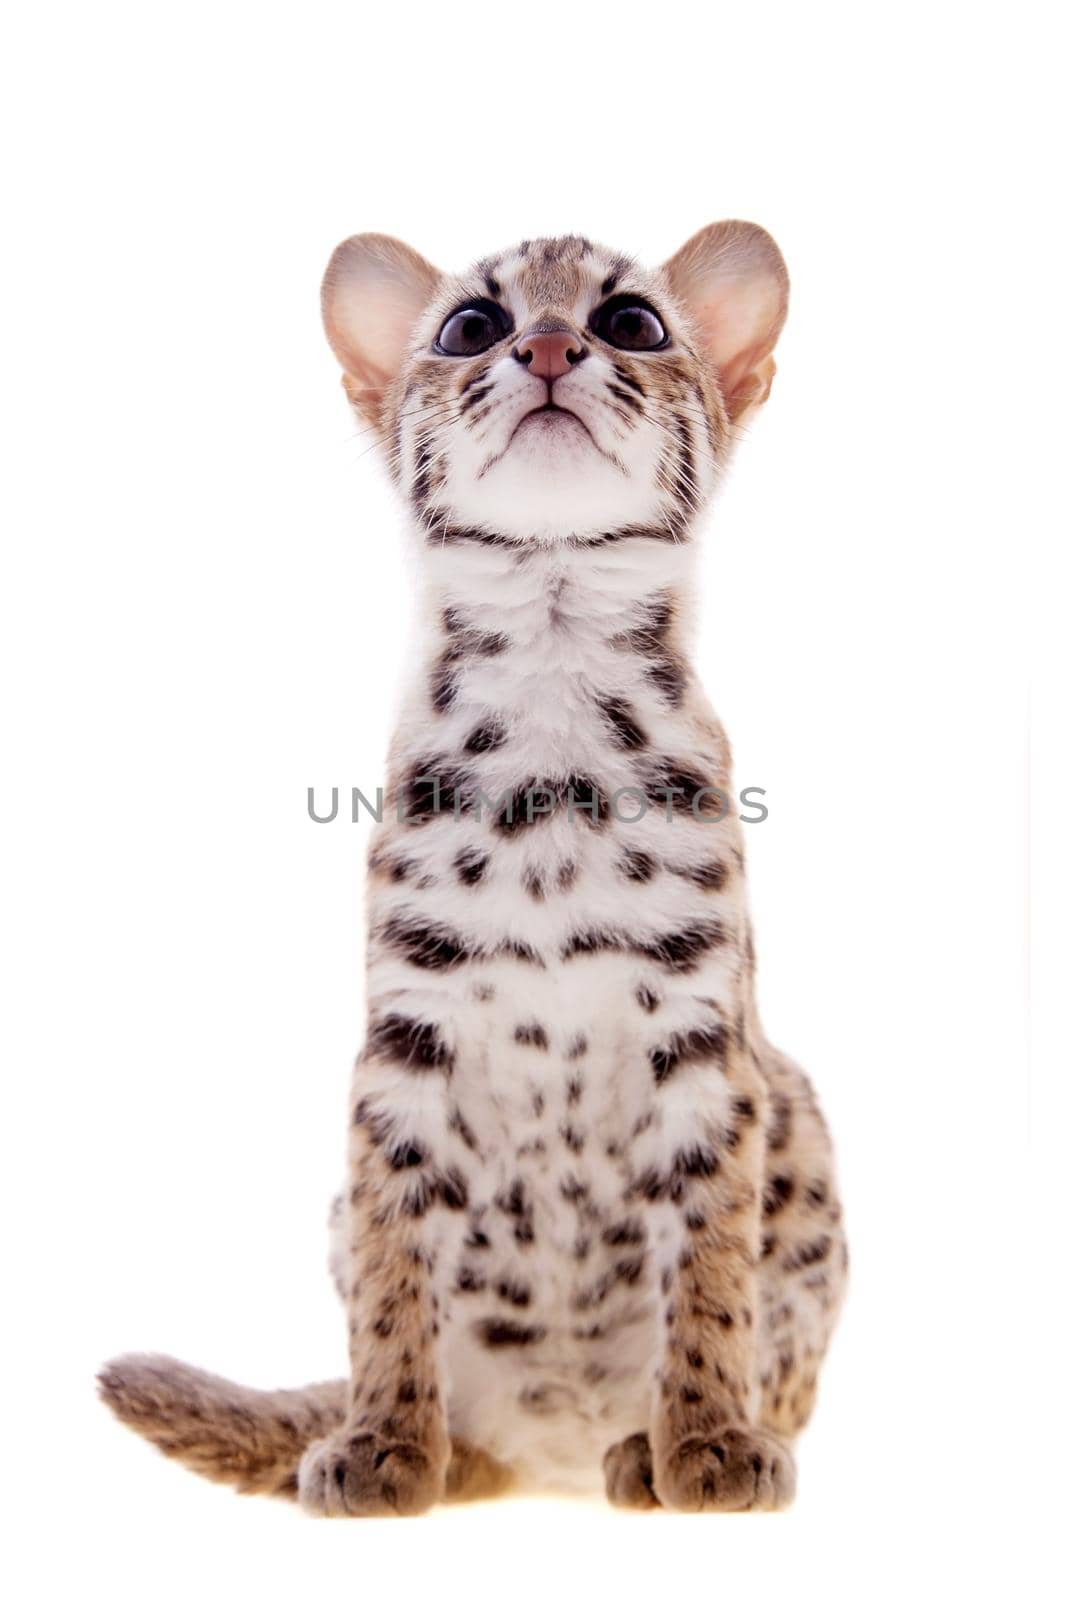 The asian leopard cat on white by RosaJay